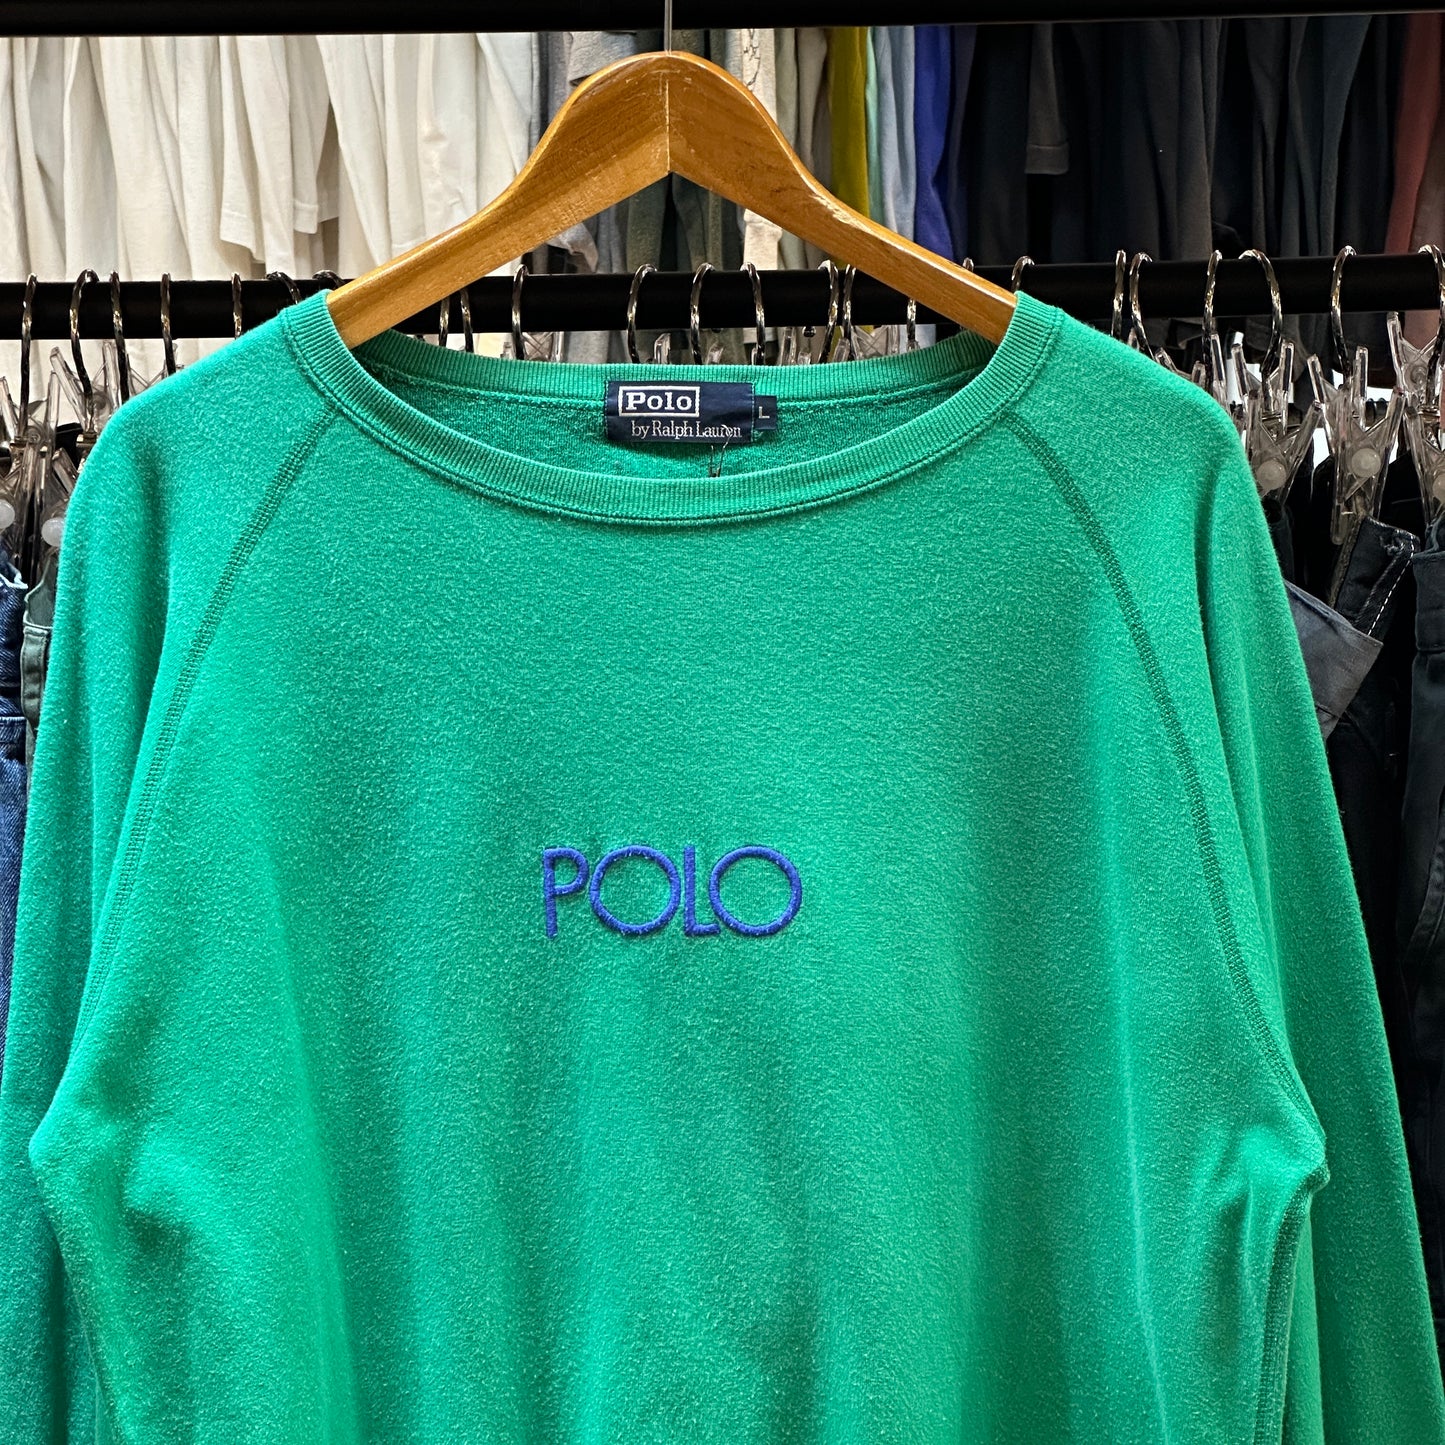 Vintage Polo by Ralph Lauren Spellouts 90's Sweater